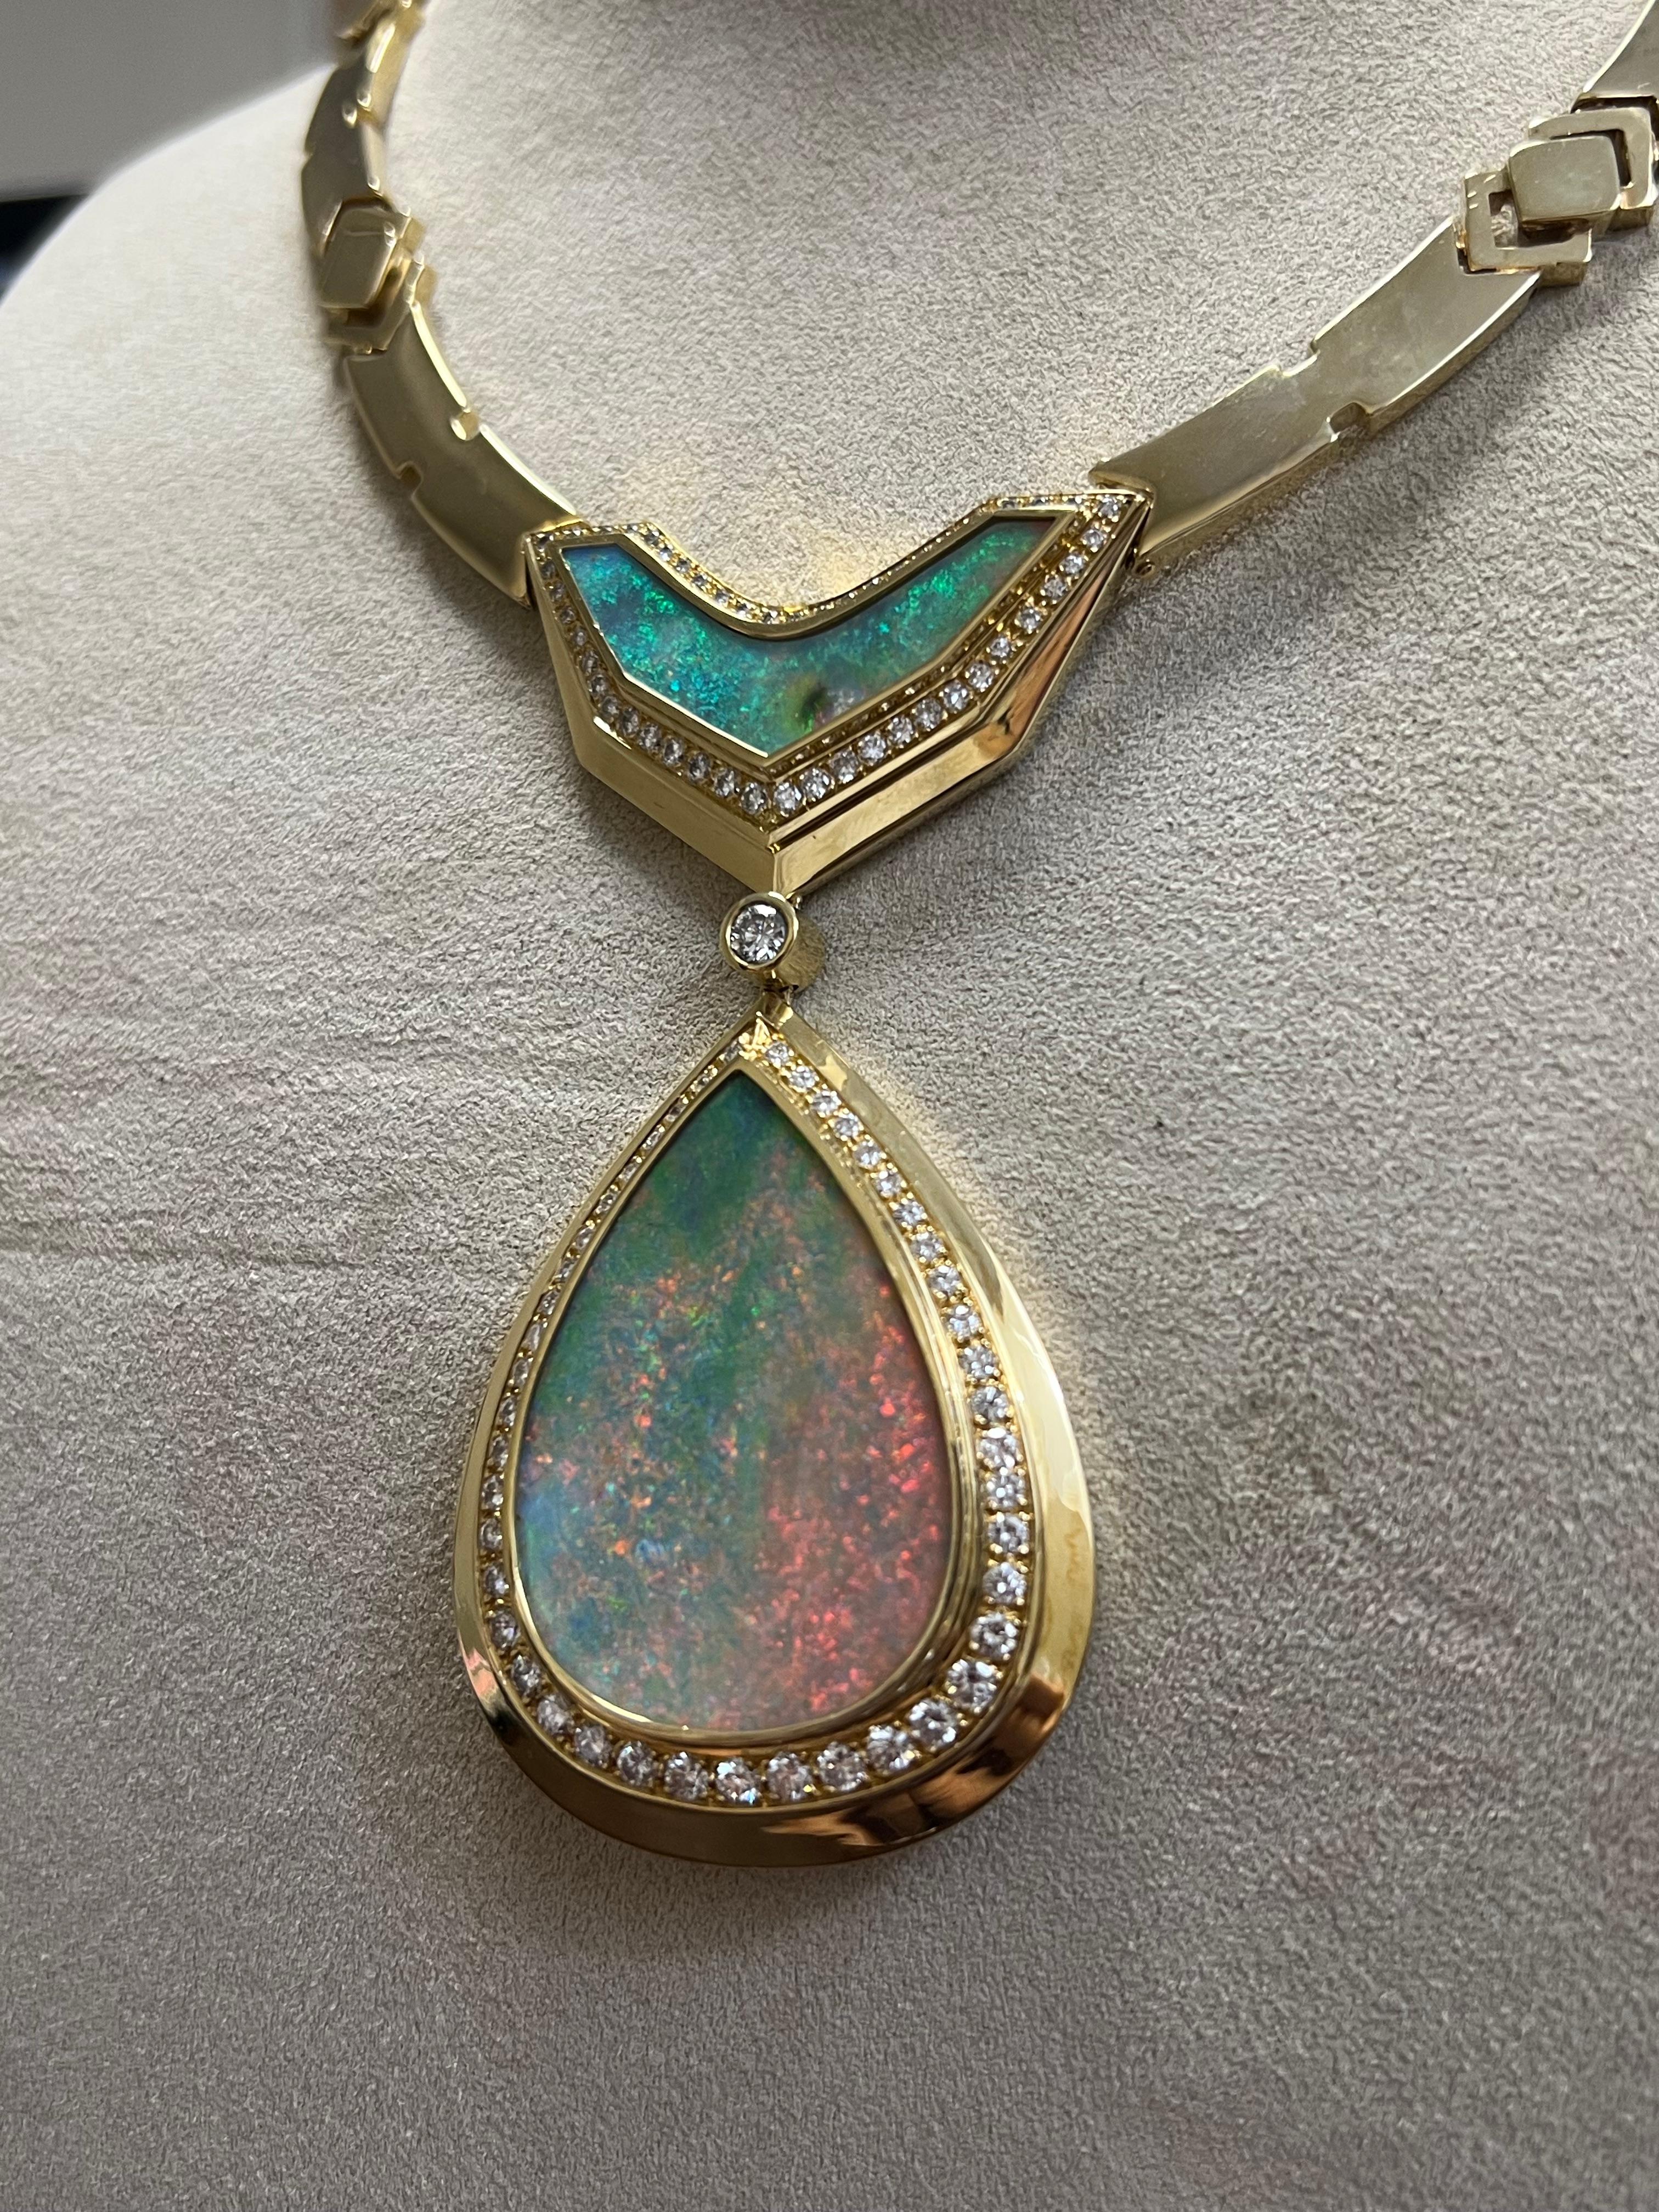 Lady's Opal and Diamonds Necklace in 14k Yellow Gold  In Good Condition For Sale In New York, NY